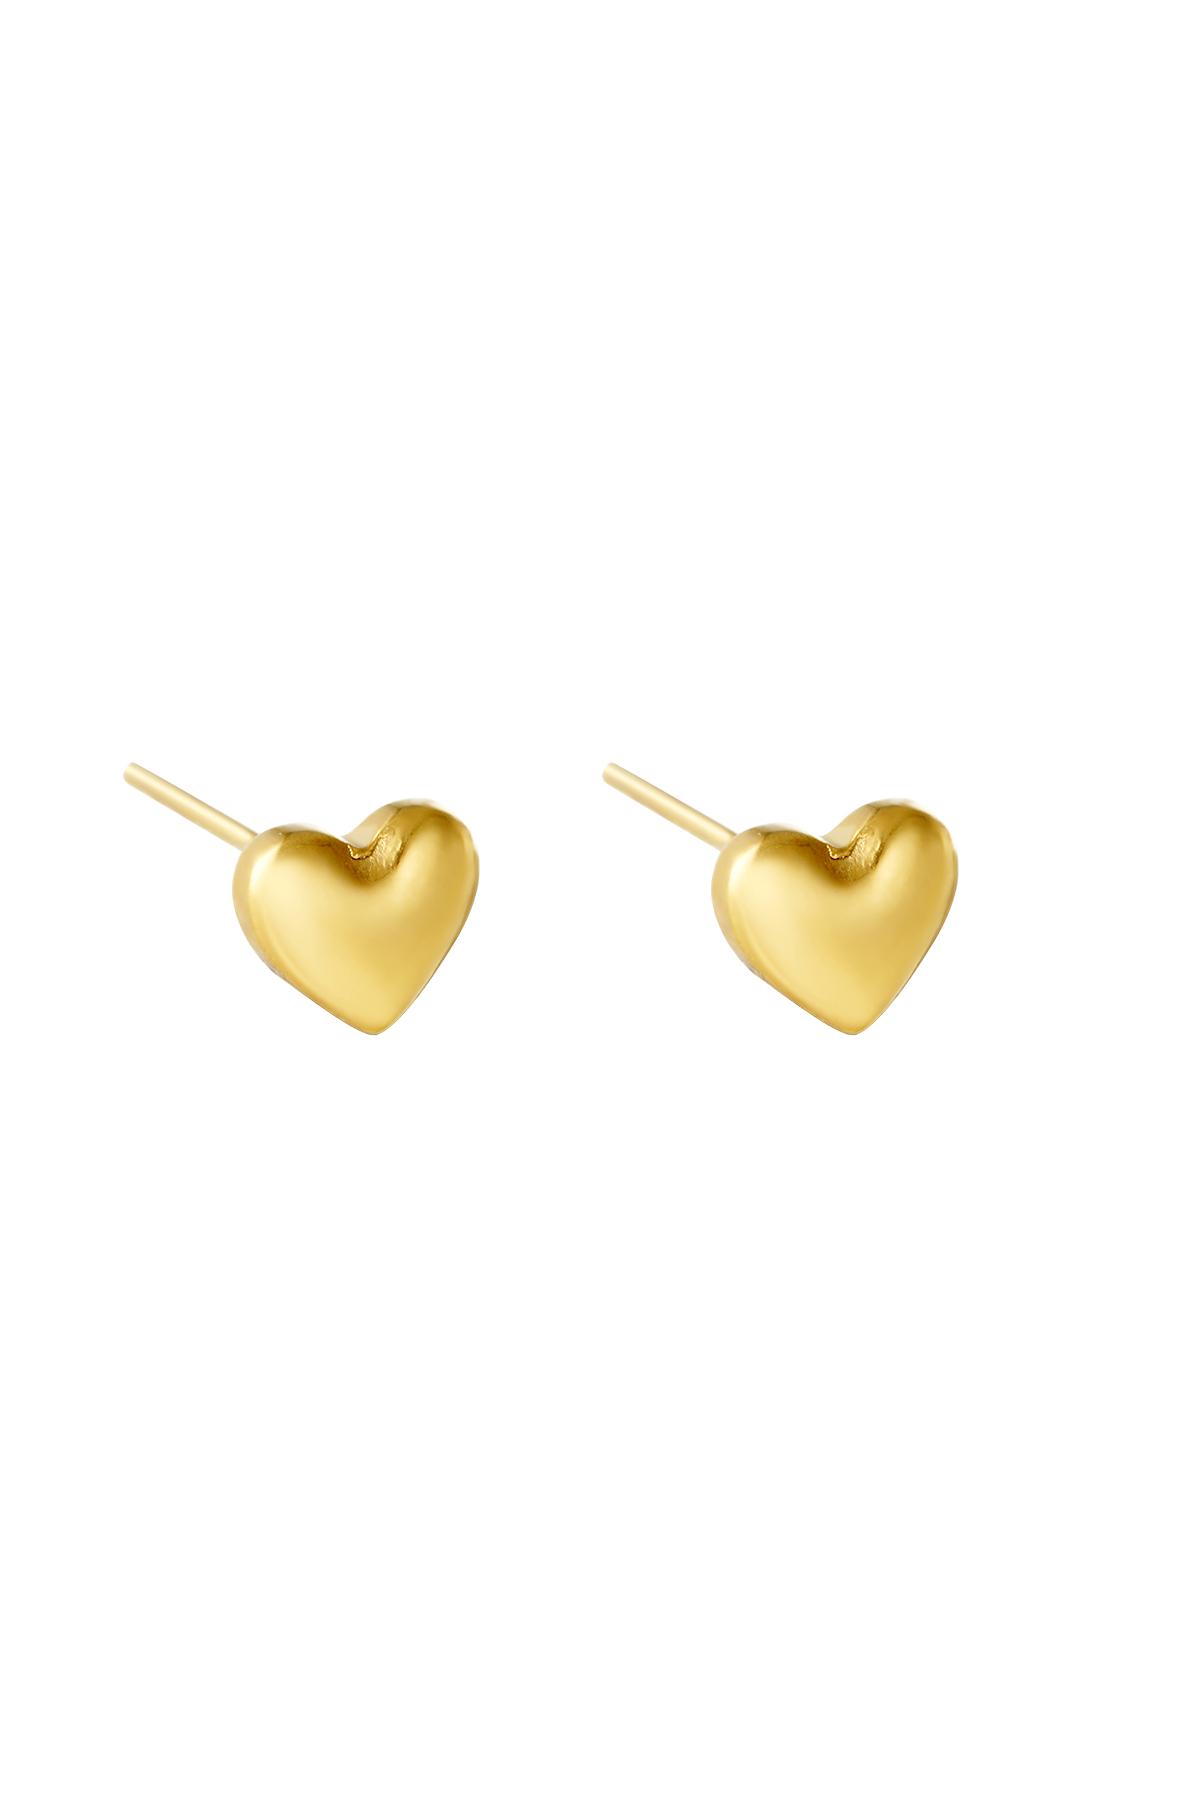 Gold / Orecchini Cuore Audace Gold Stainless Steel 